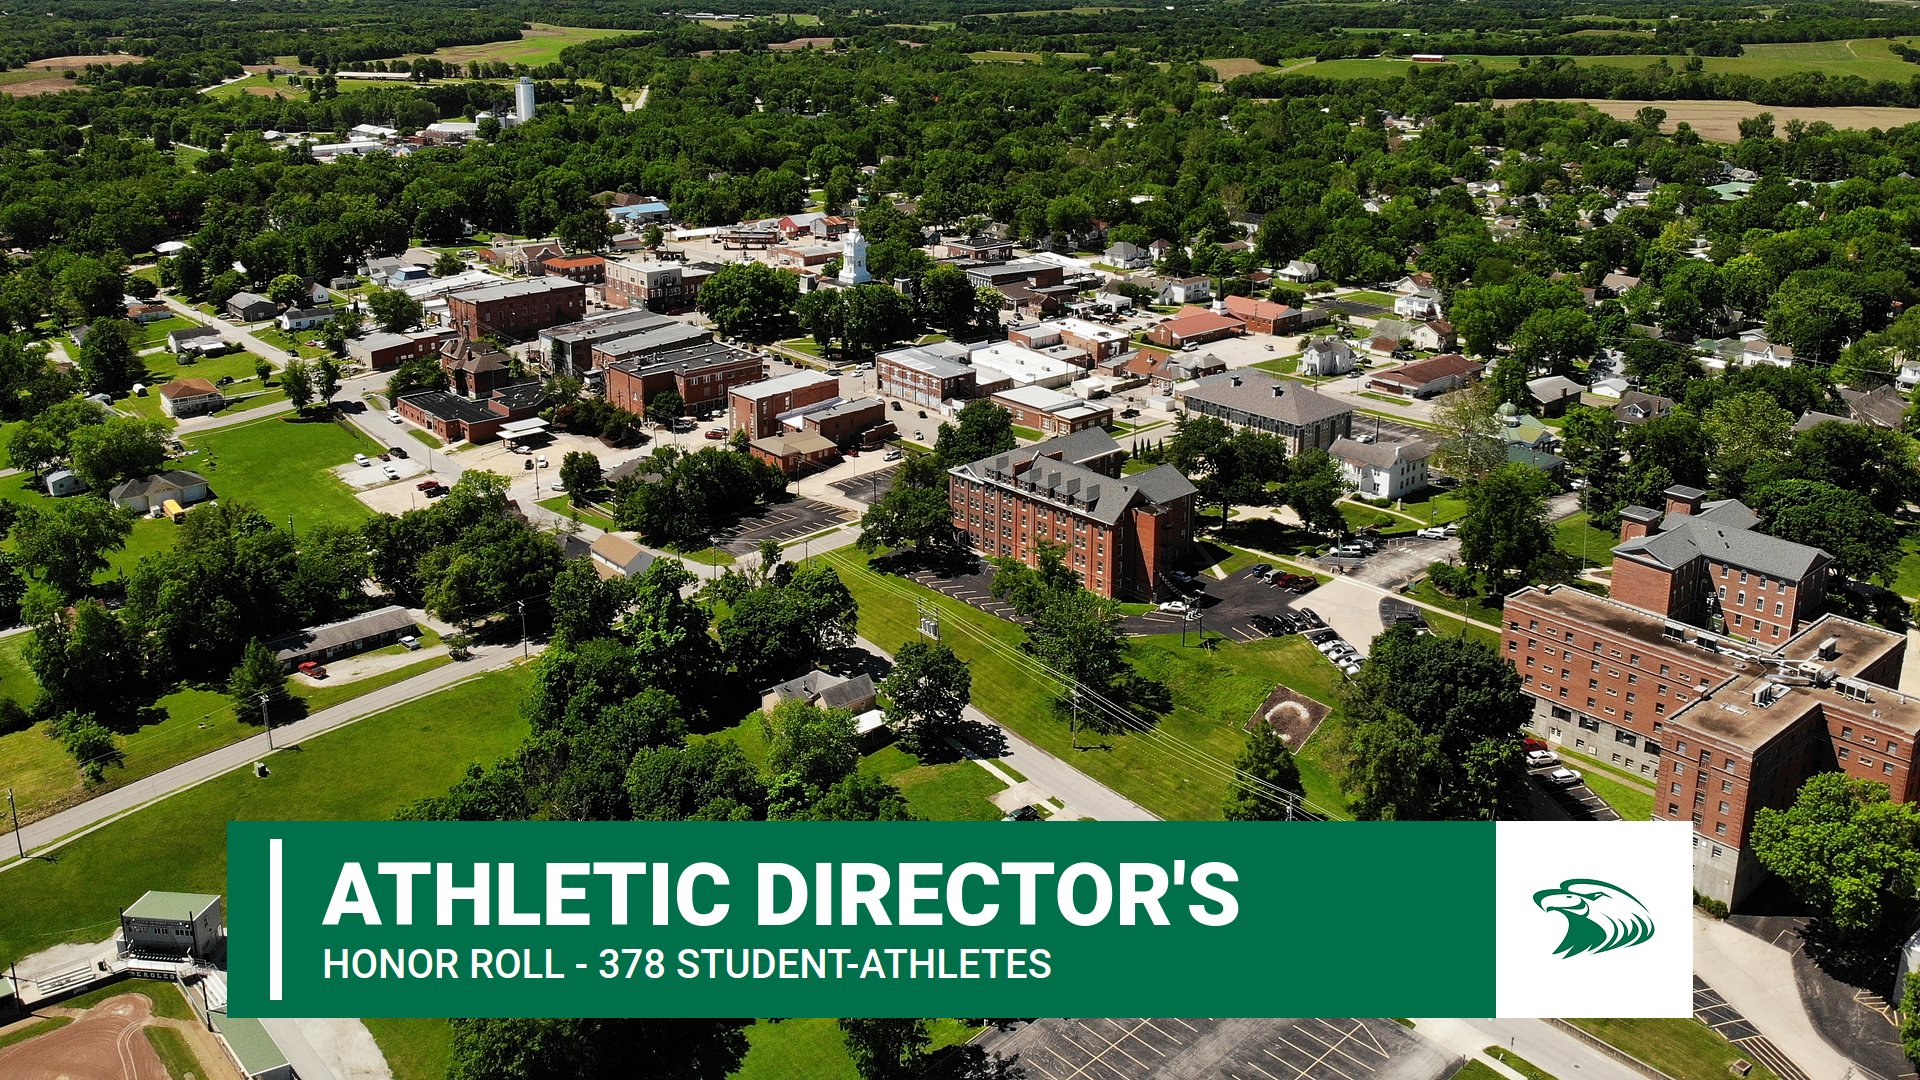 Central Methodist Recognizes 378 Student-Athletes on Athletic Director's Honor Roll